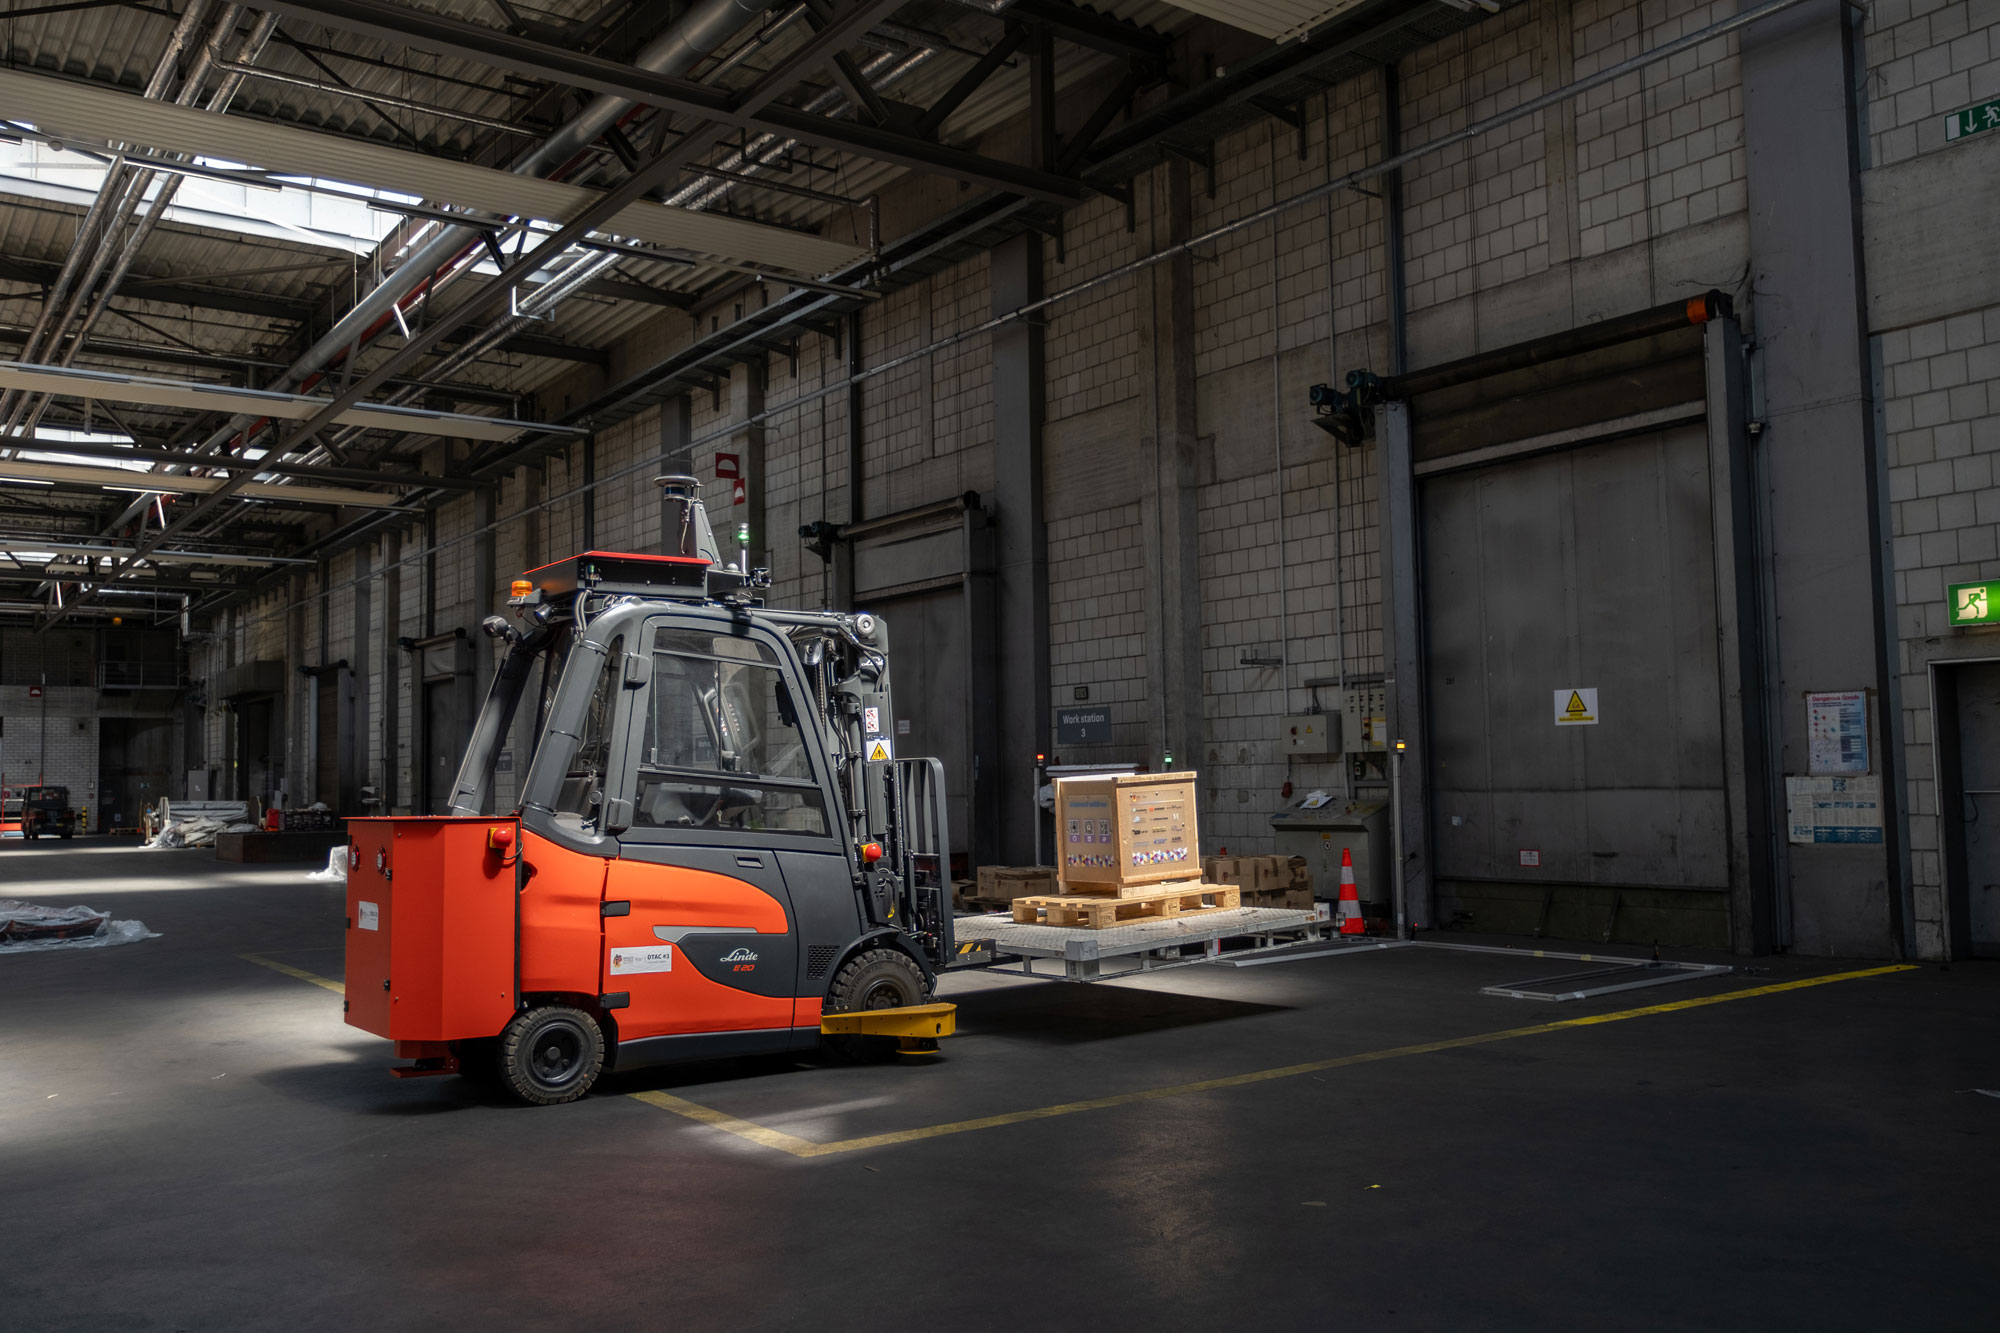 Autonomously controlled forklift truck from Fraunhofer IML sets down large warehouse pallet during air freight handling at Munich Airport during the demonstration of the DTAC research project.